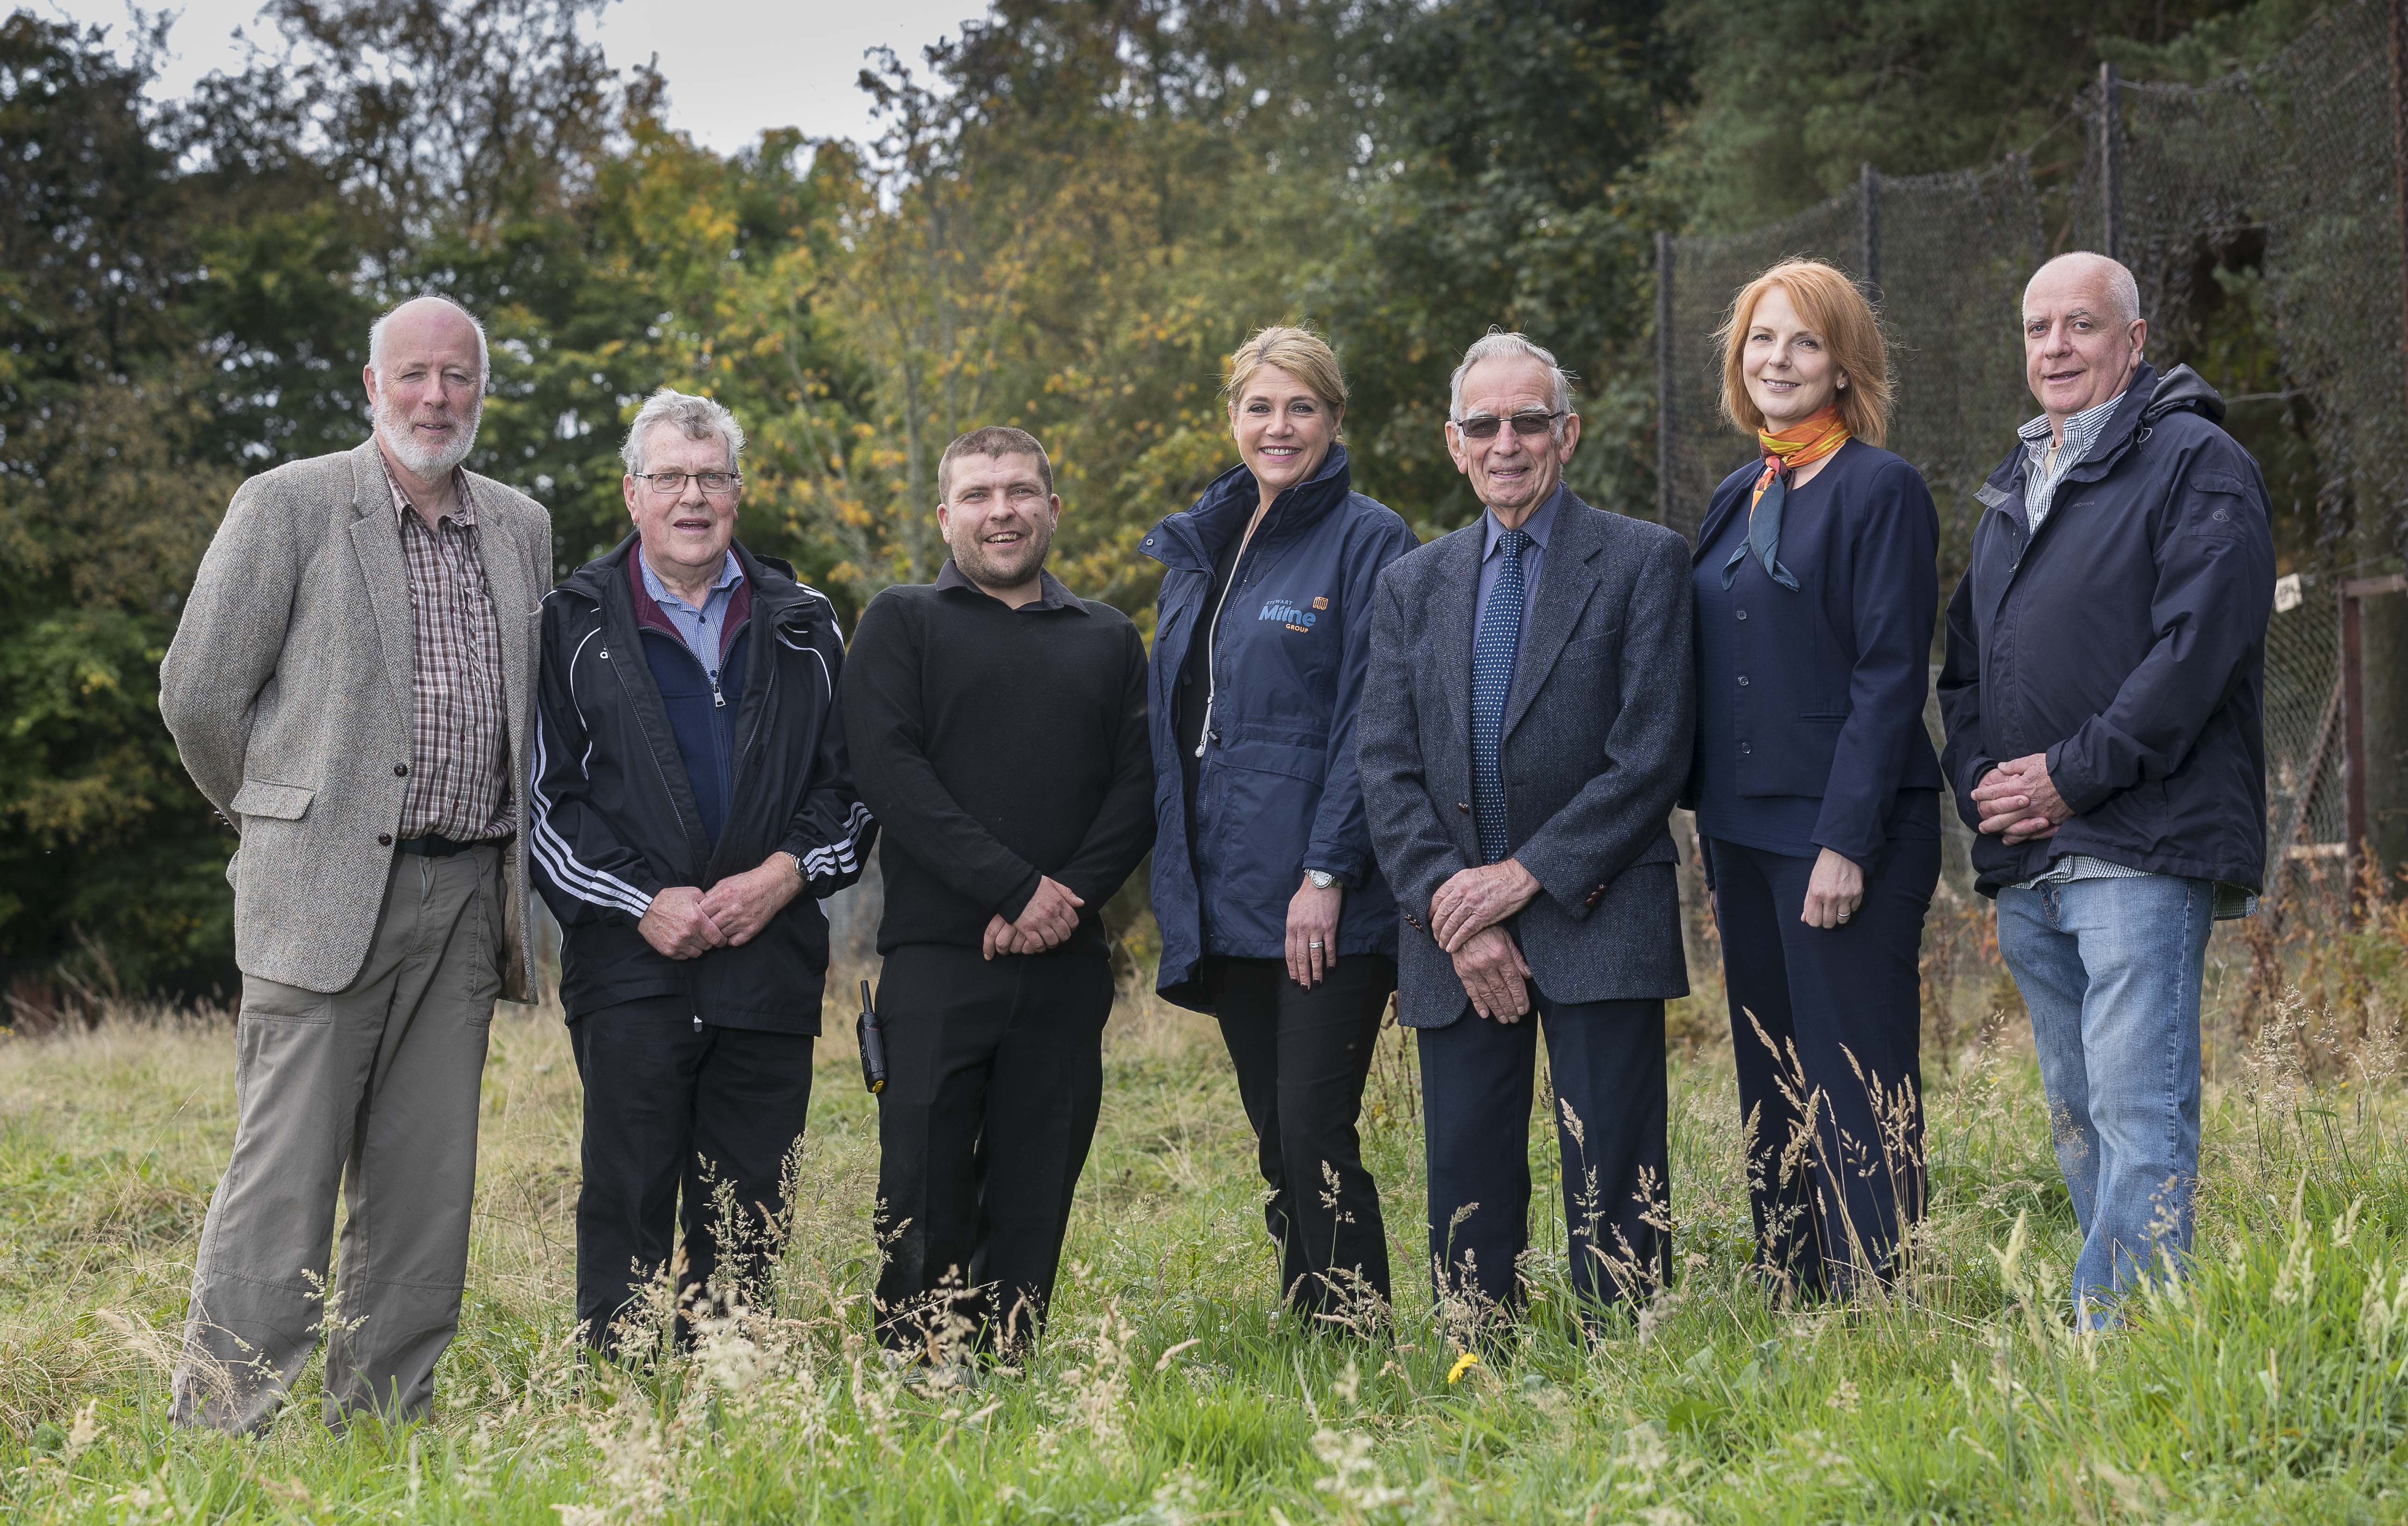 Aberdeenshire Men’s Shed site goes green thanks to Stewart Milne Group